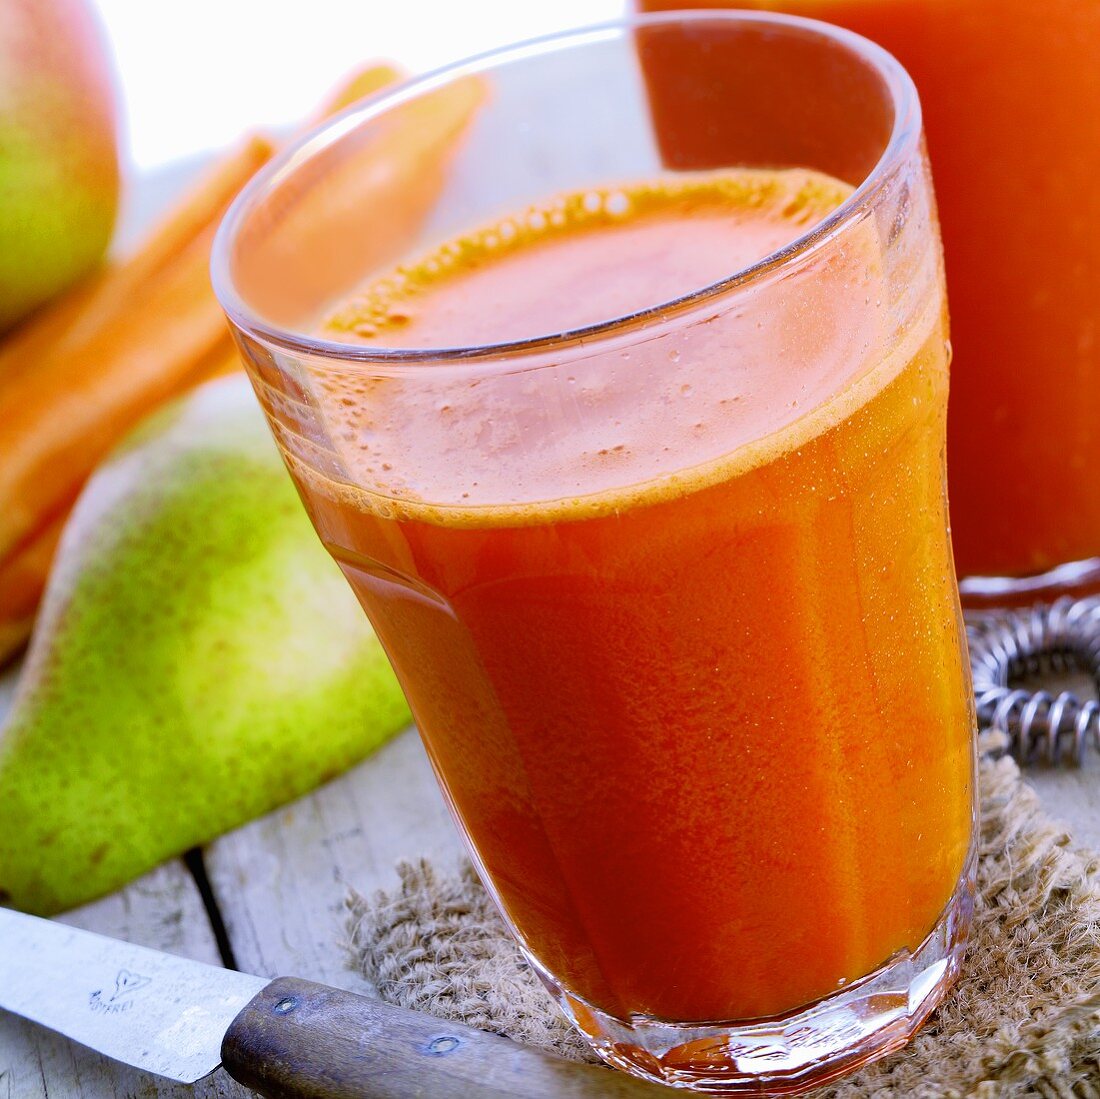 Carrot and pear smoothie